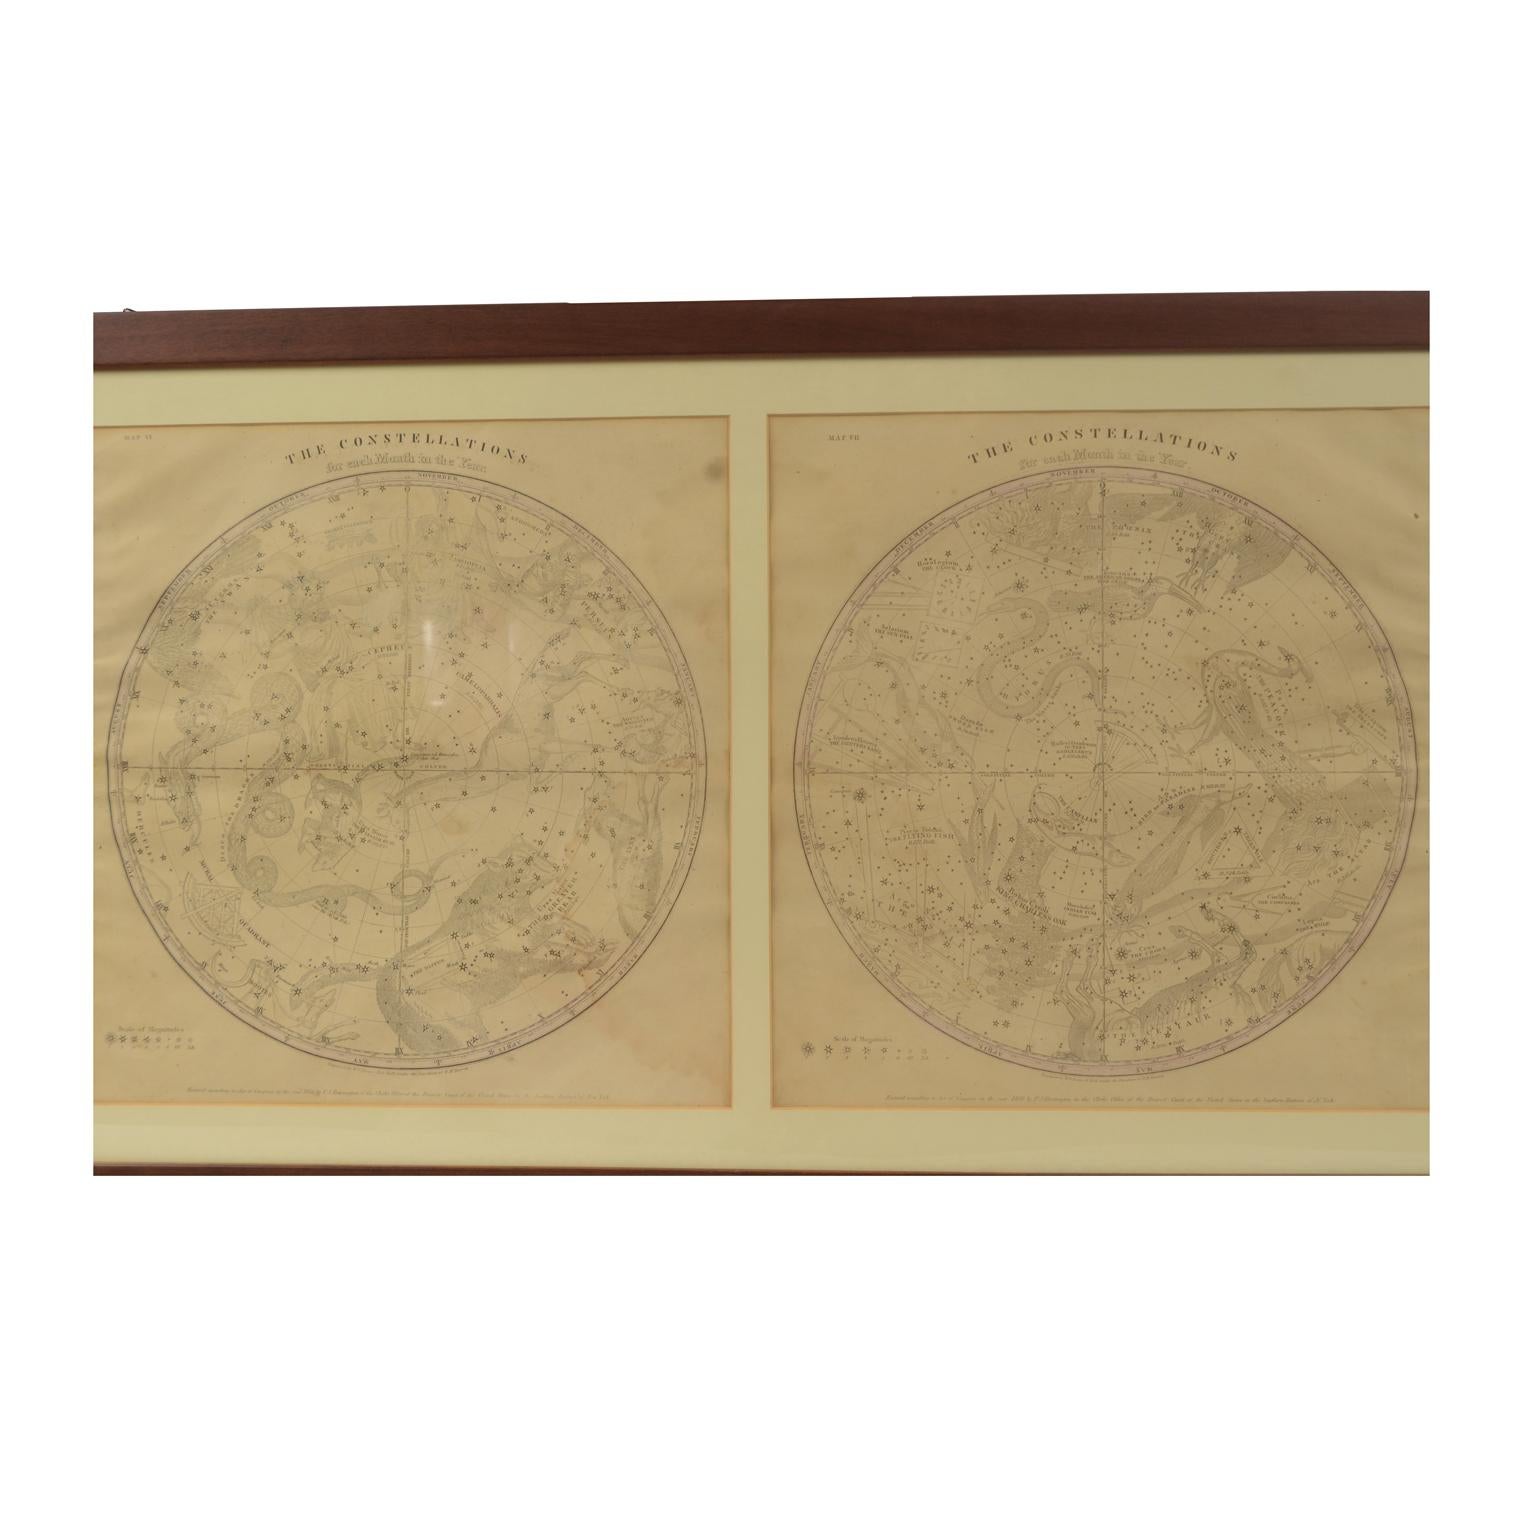 Map VI and VII depicting the constellations titled The Constellations for each Month in the Year. 